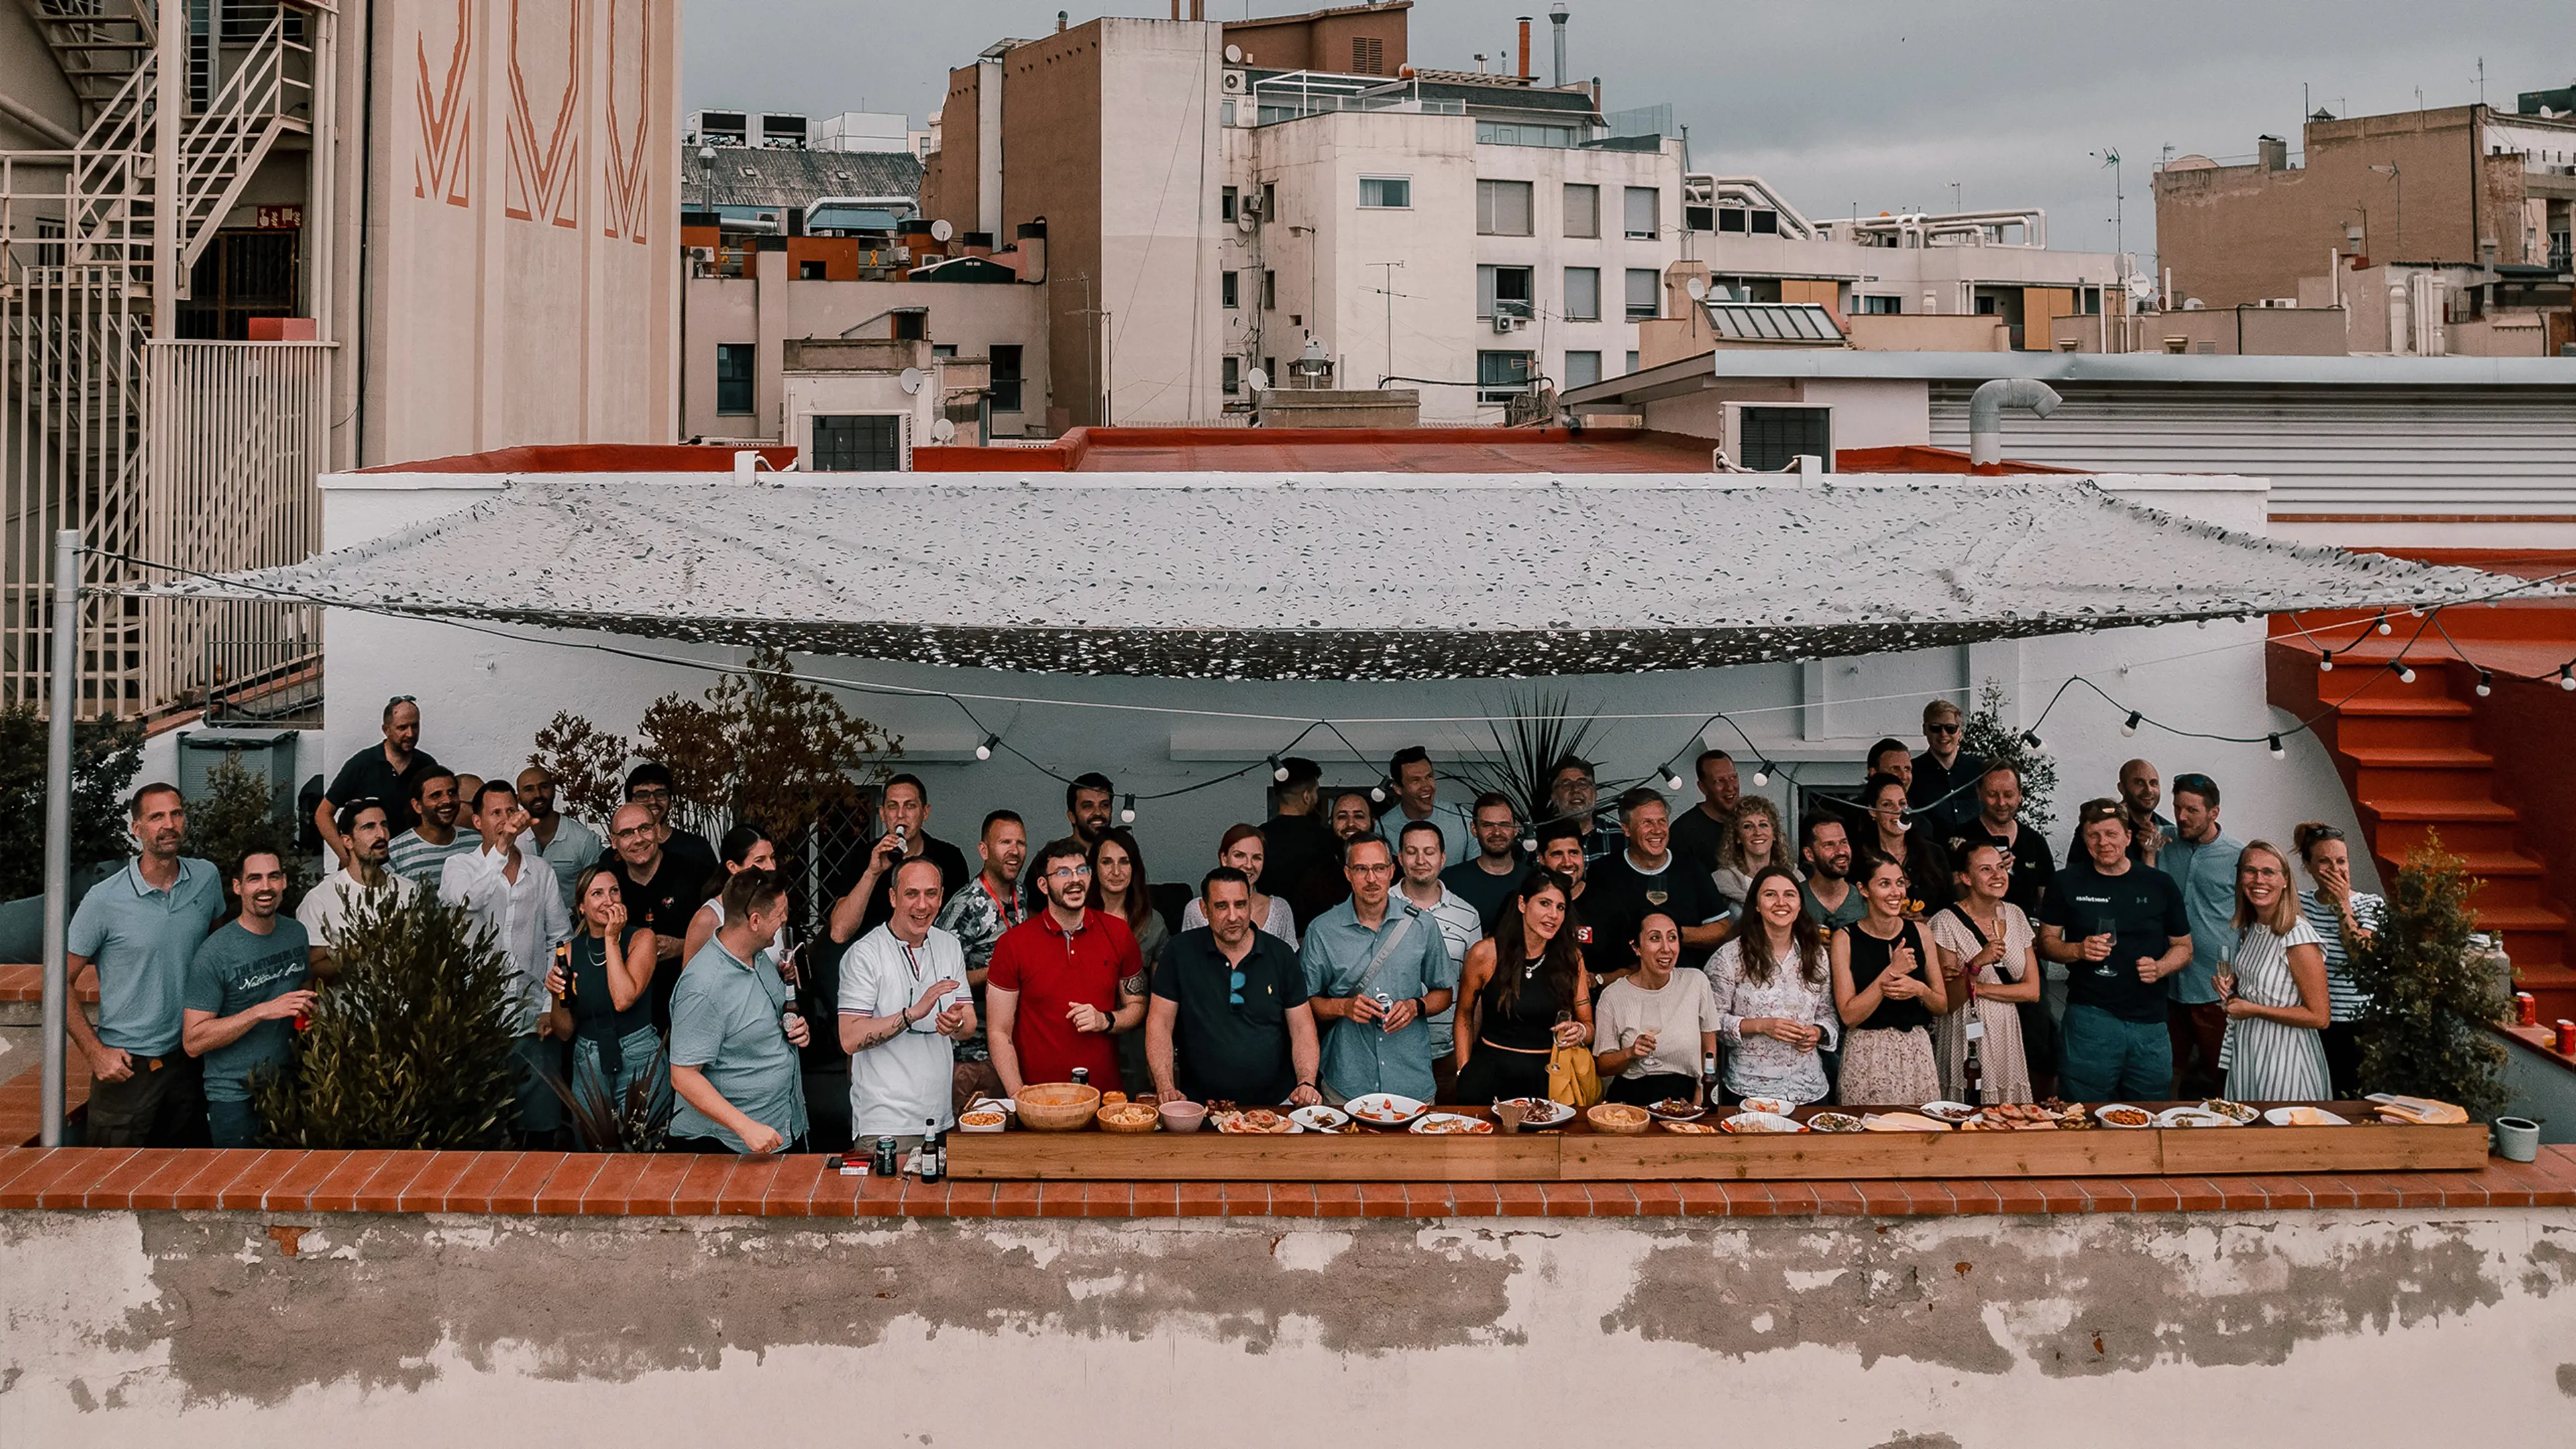 Picture form the sky of group of people on a rooftop terrace